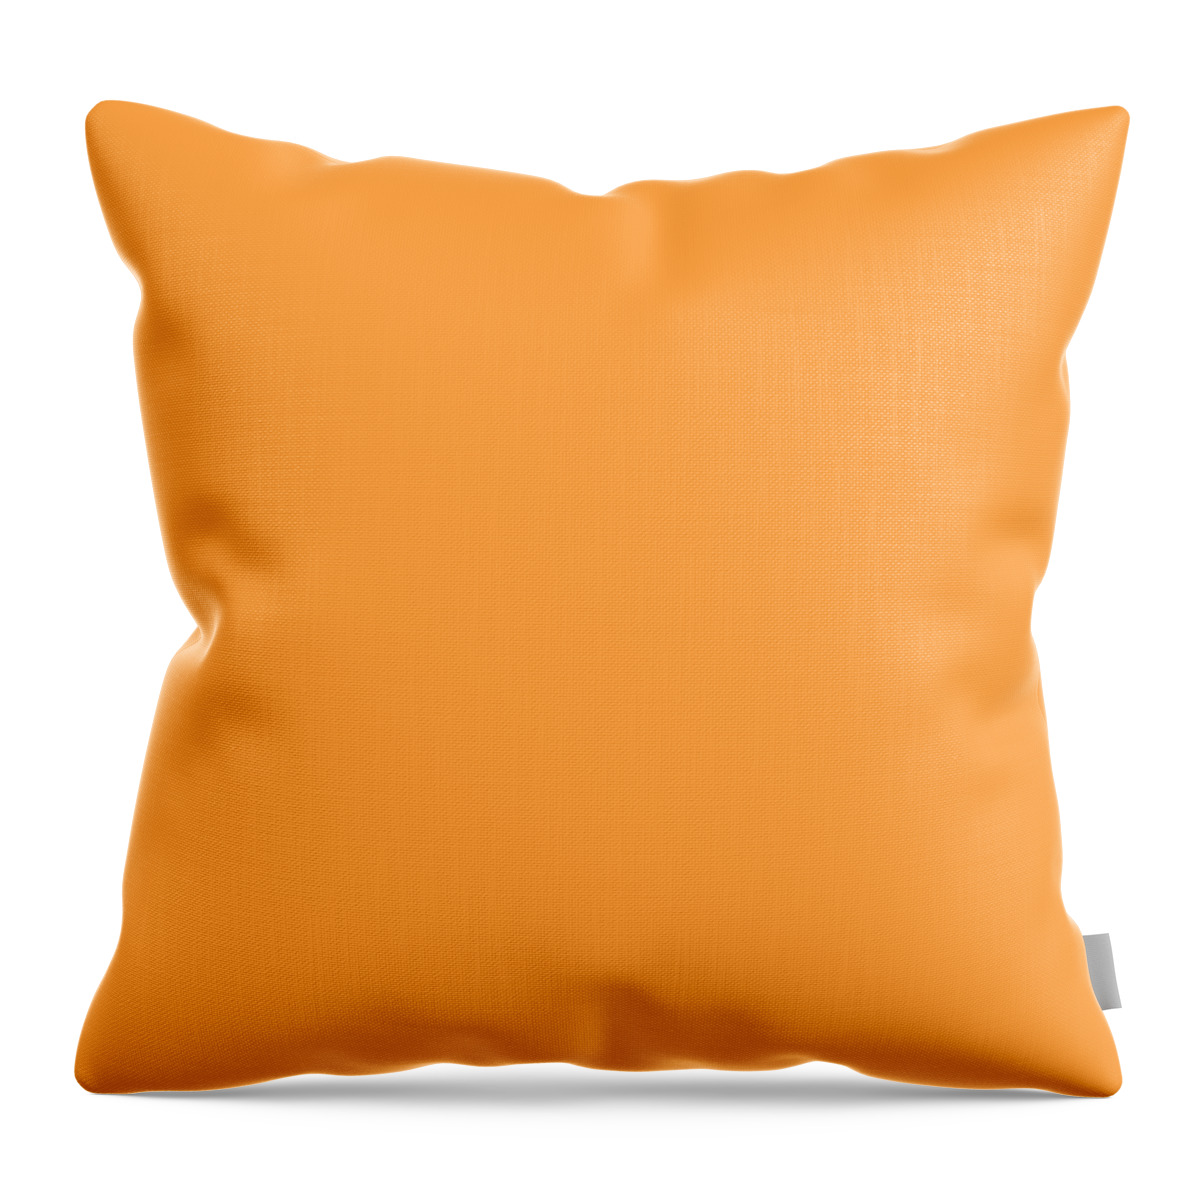 Radiation Carrot Throw Pillow featuring the digital art Radiation Carrot by TintoDesigns